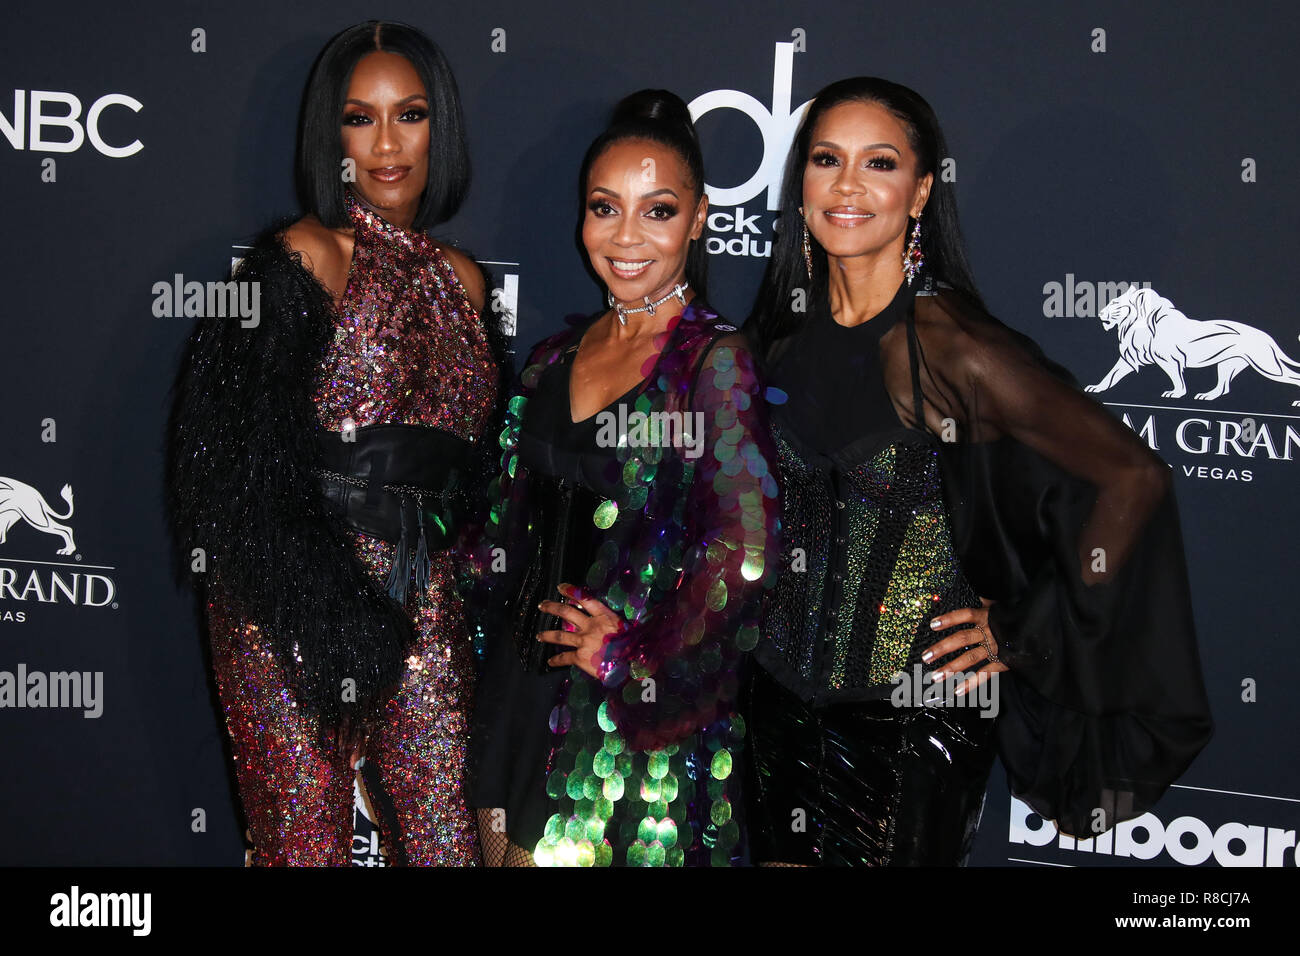 LAS VEGAS, NV, USA - MAY 20: Rhona Bennett, Terry Ellis, Cindy Herron, En Vogue in the press room at the 2018 Billboard Music Awards held at the MGM Grand Garden Arena on May 20, 2018 in Las Vegas, Nevada, United States. (Photo by Xavier Collin/Image Press Agency) Stock Photo